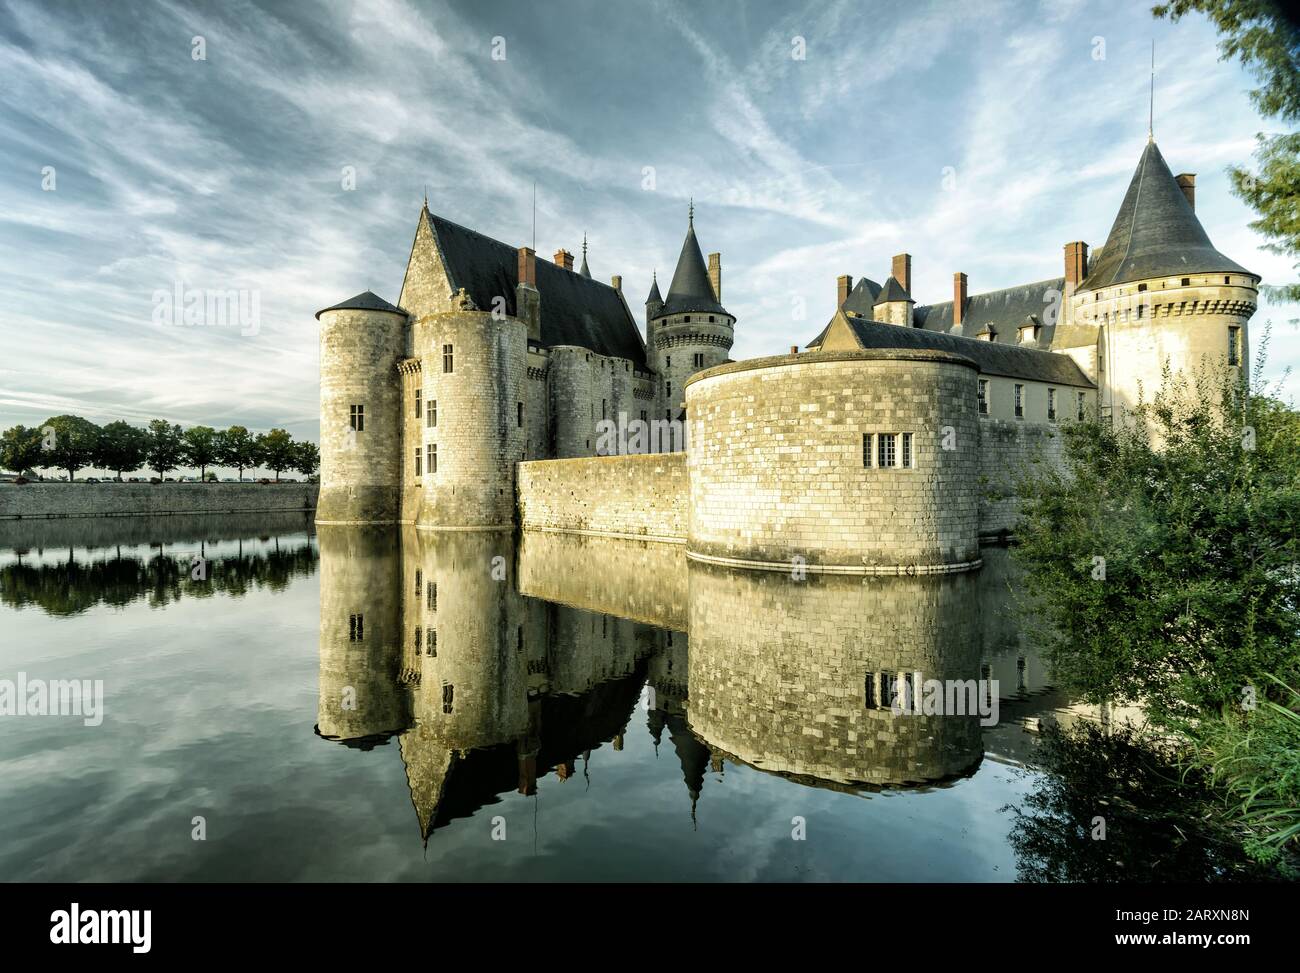 The chateau of Sully-sur-Loire in the evening, France. This castle is located in the Loire Valley, dates from the 14th century and is a prime example Stock Photo